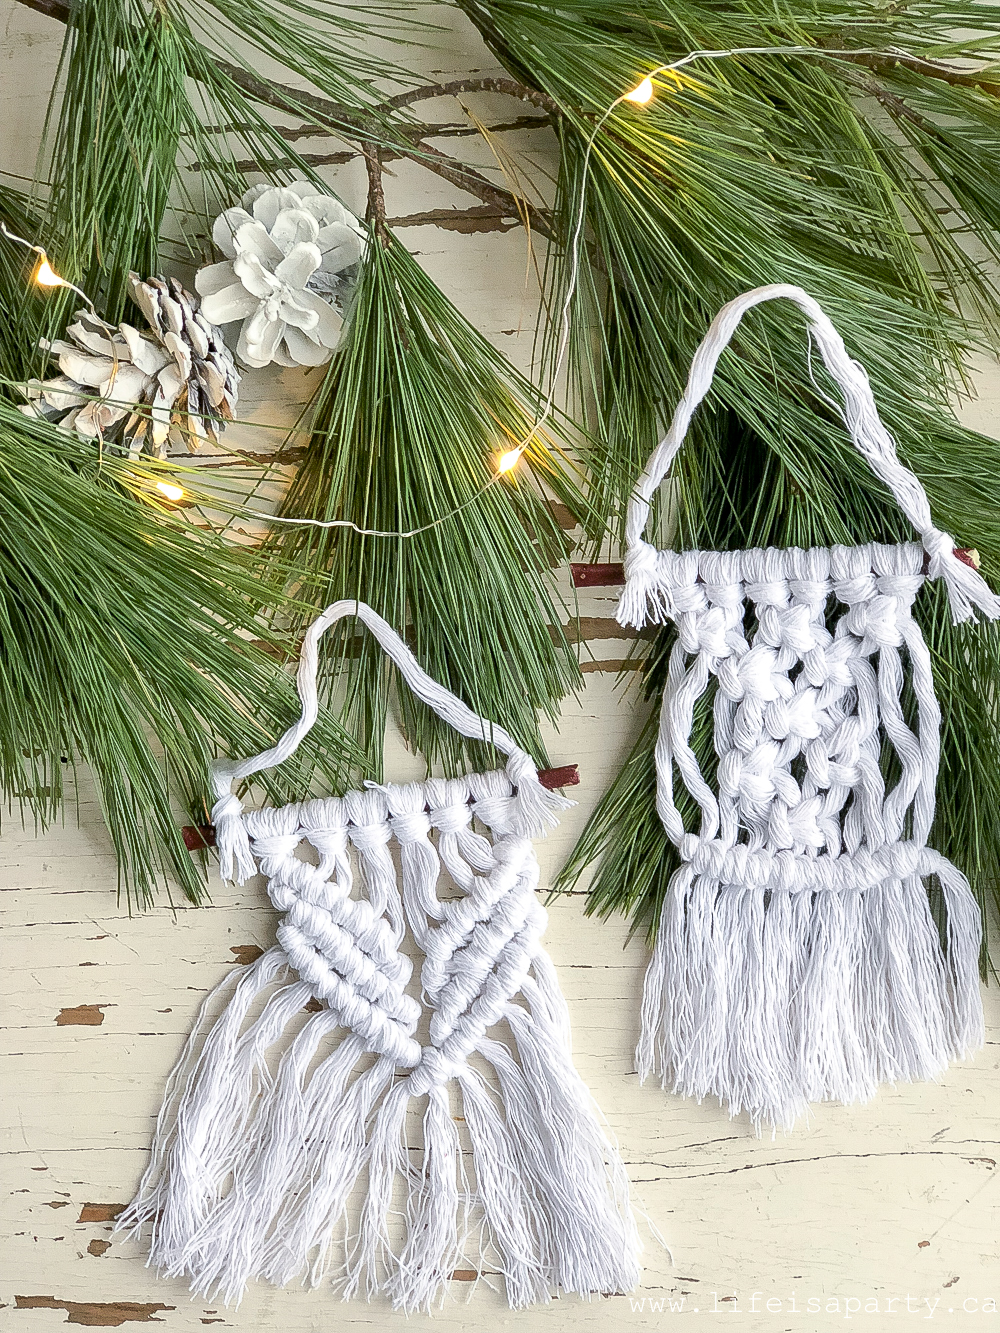 Mini macrame ornament DIY by Life is a Party / Learn how to make beginner-friendly macrame knots so you can macrame all day!